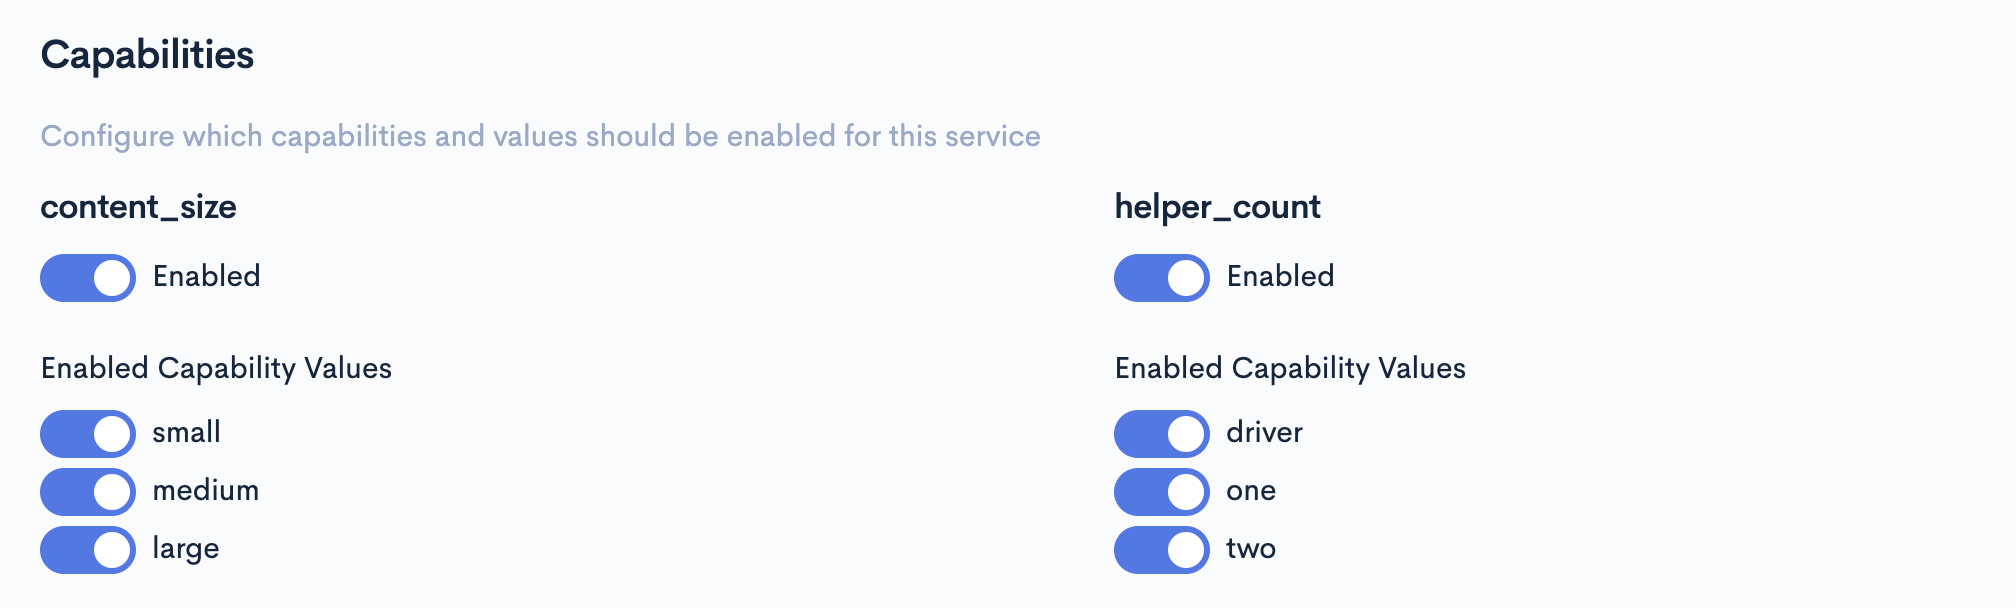 Hailing_services_capabilities.png